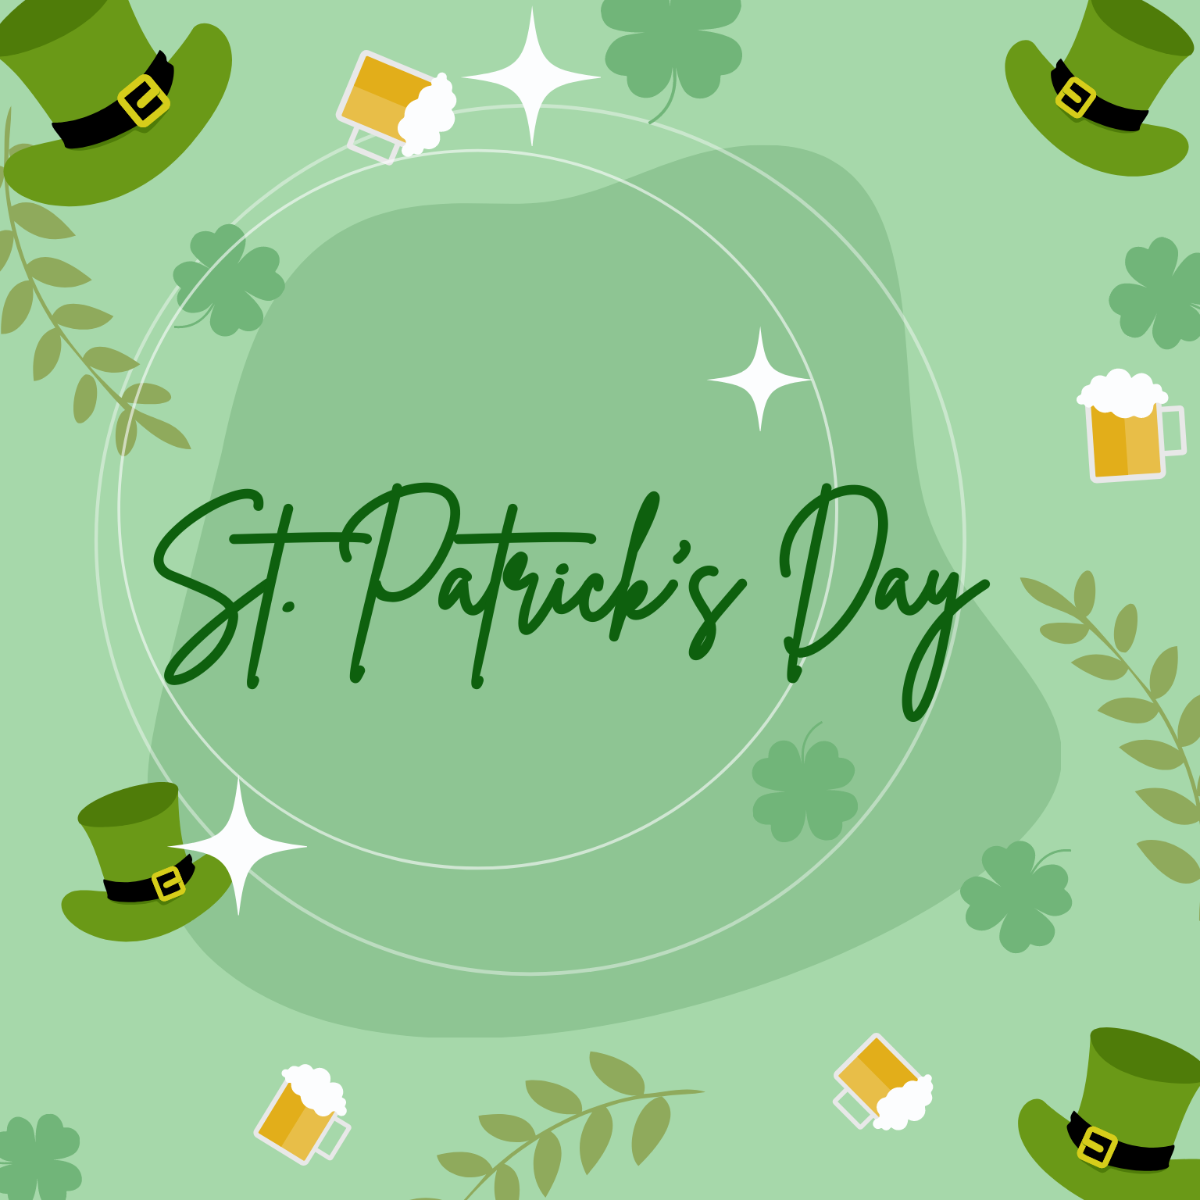 St. Patrick's Day Graphic Vector